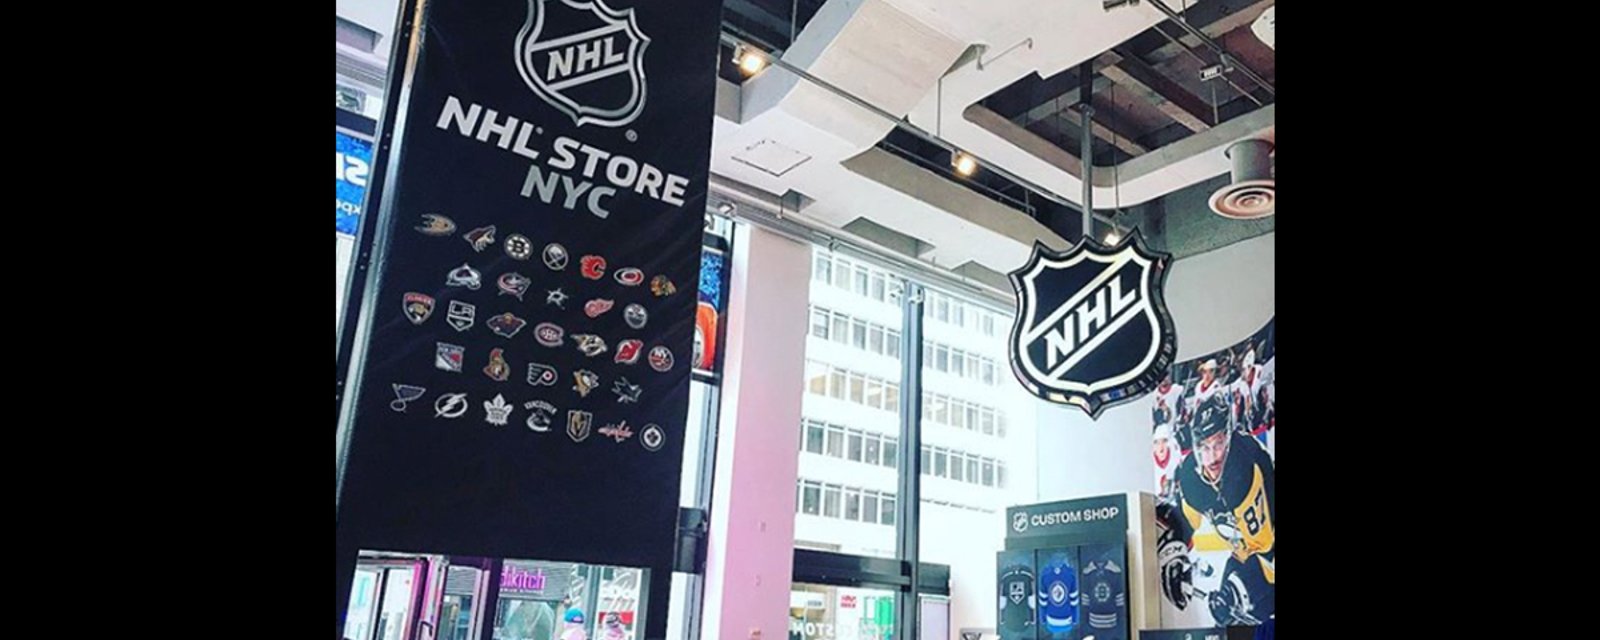 Rumor: New logo/jersey coming for Canadian NHL team?